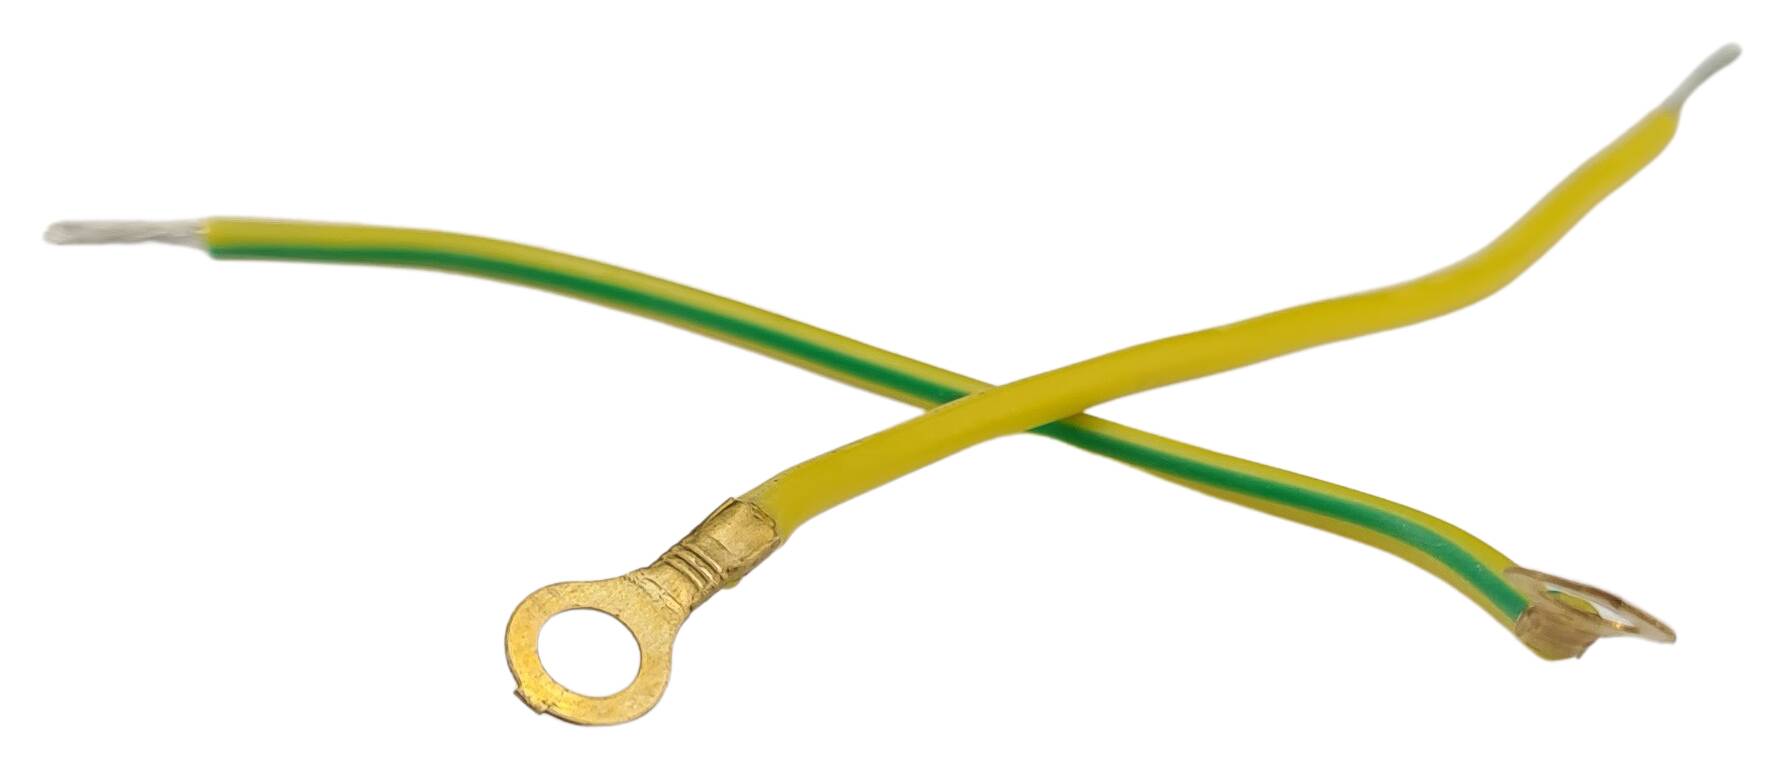 stranded wire section 1x0,75 H05V-K 100 mm long with loop M4/ ferrule green-yellow